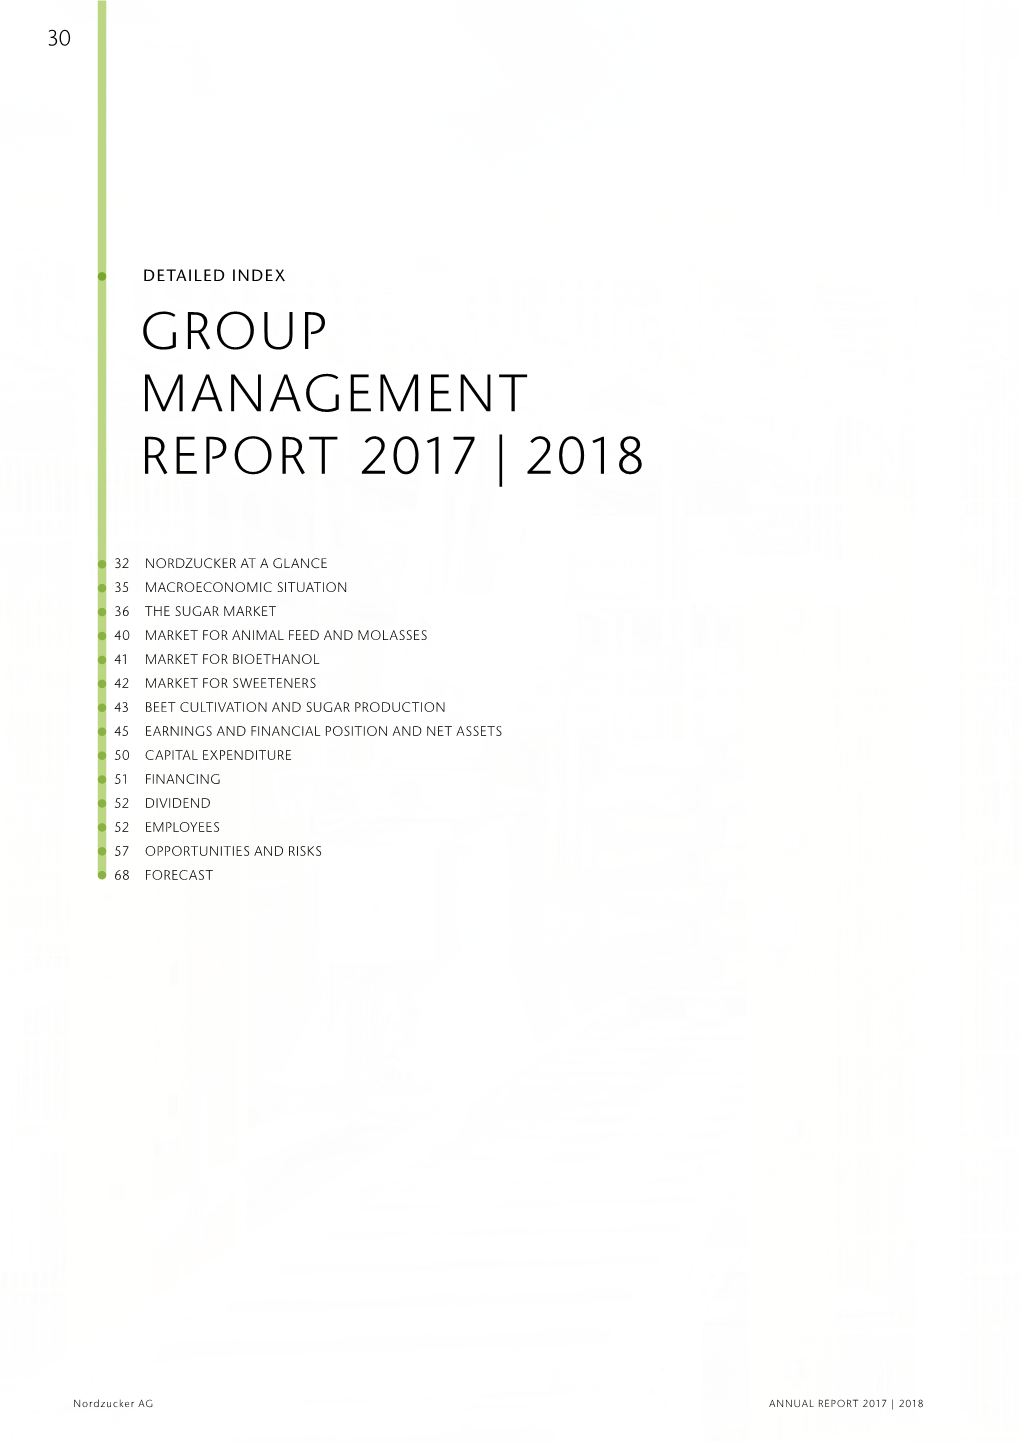 Group Management Report 2017 | 2018